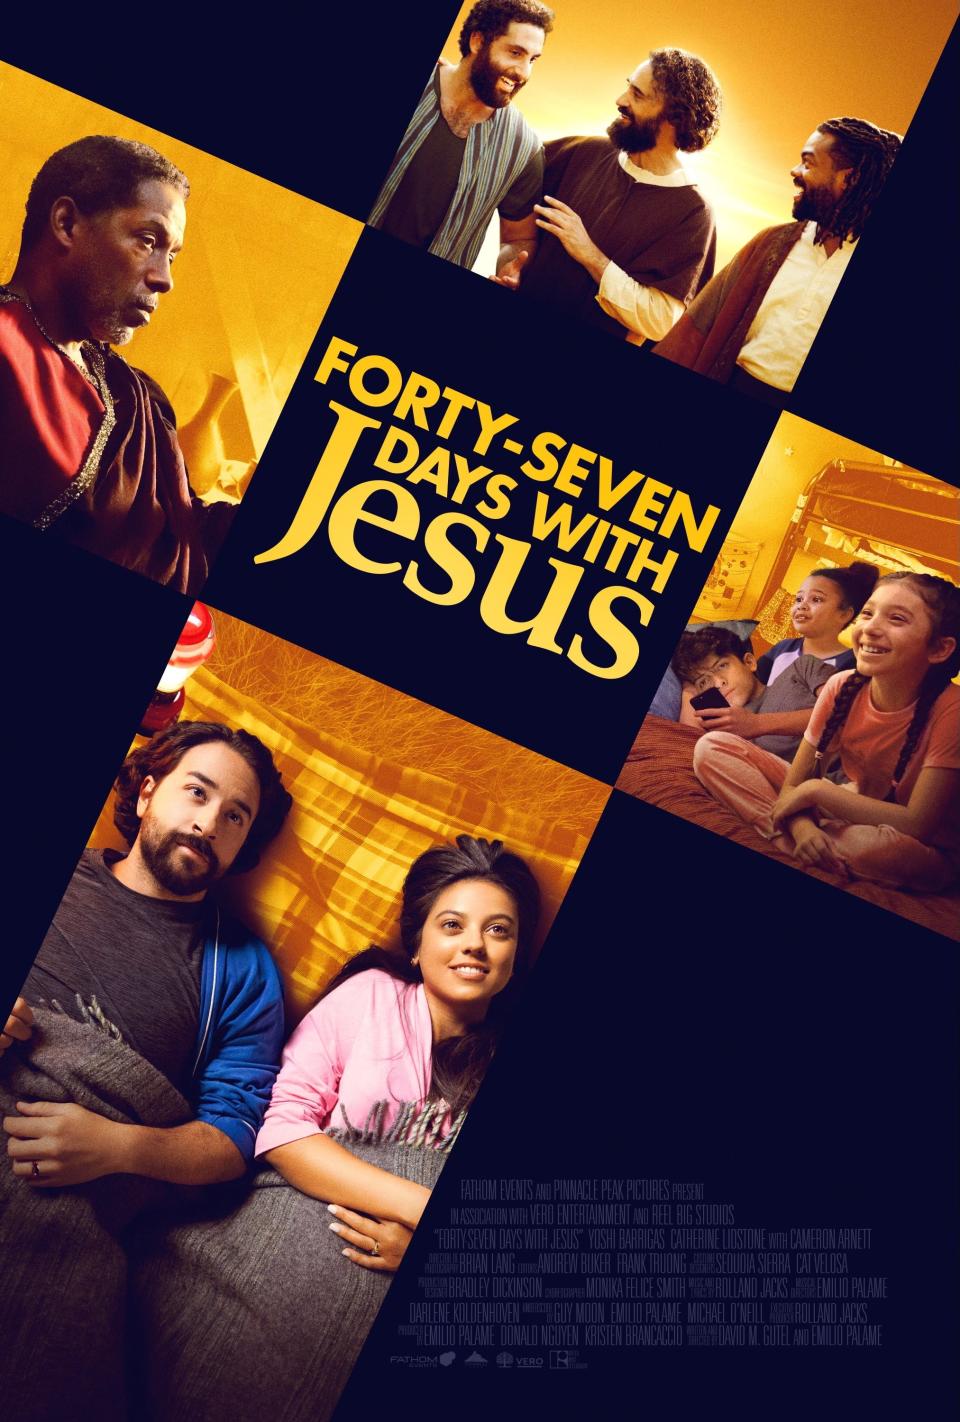 Poster for "Forty-Seven Days With Jesus."